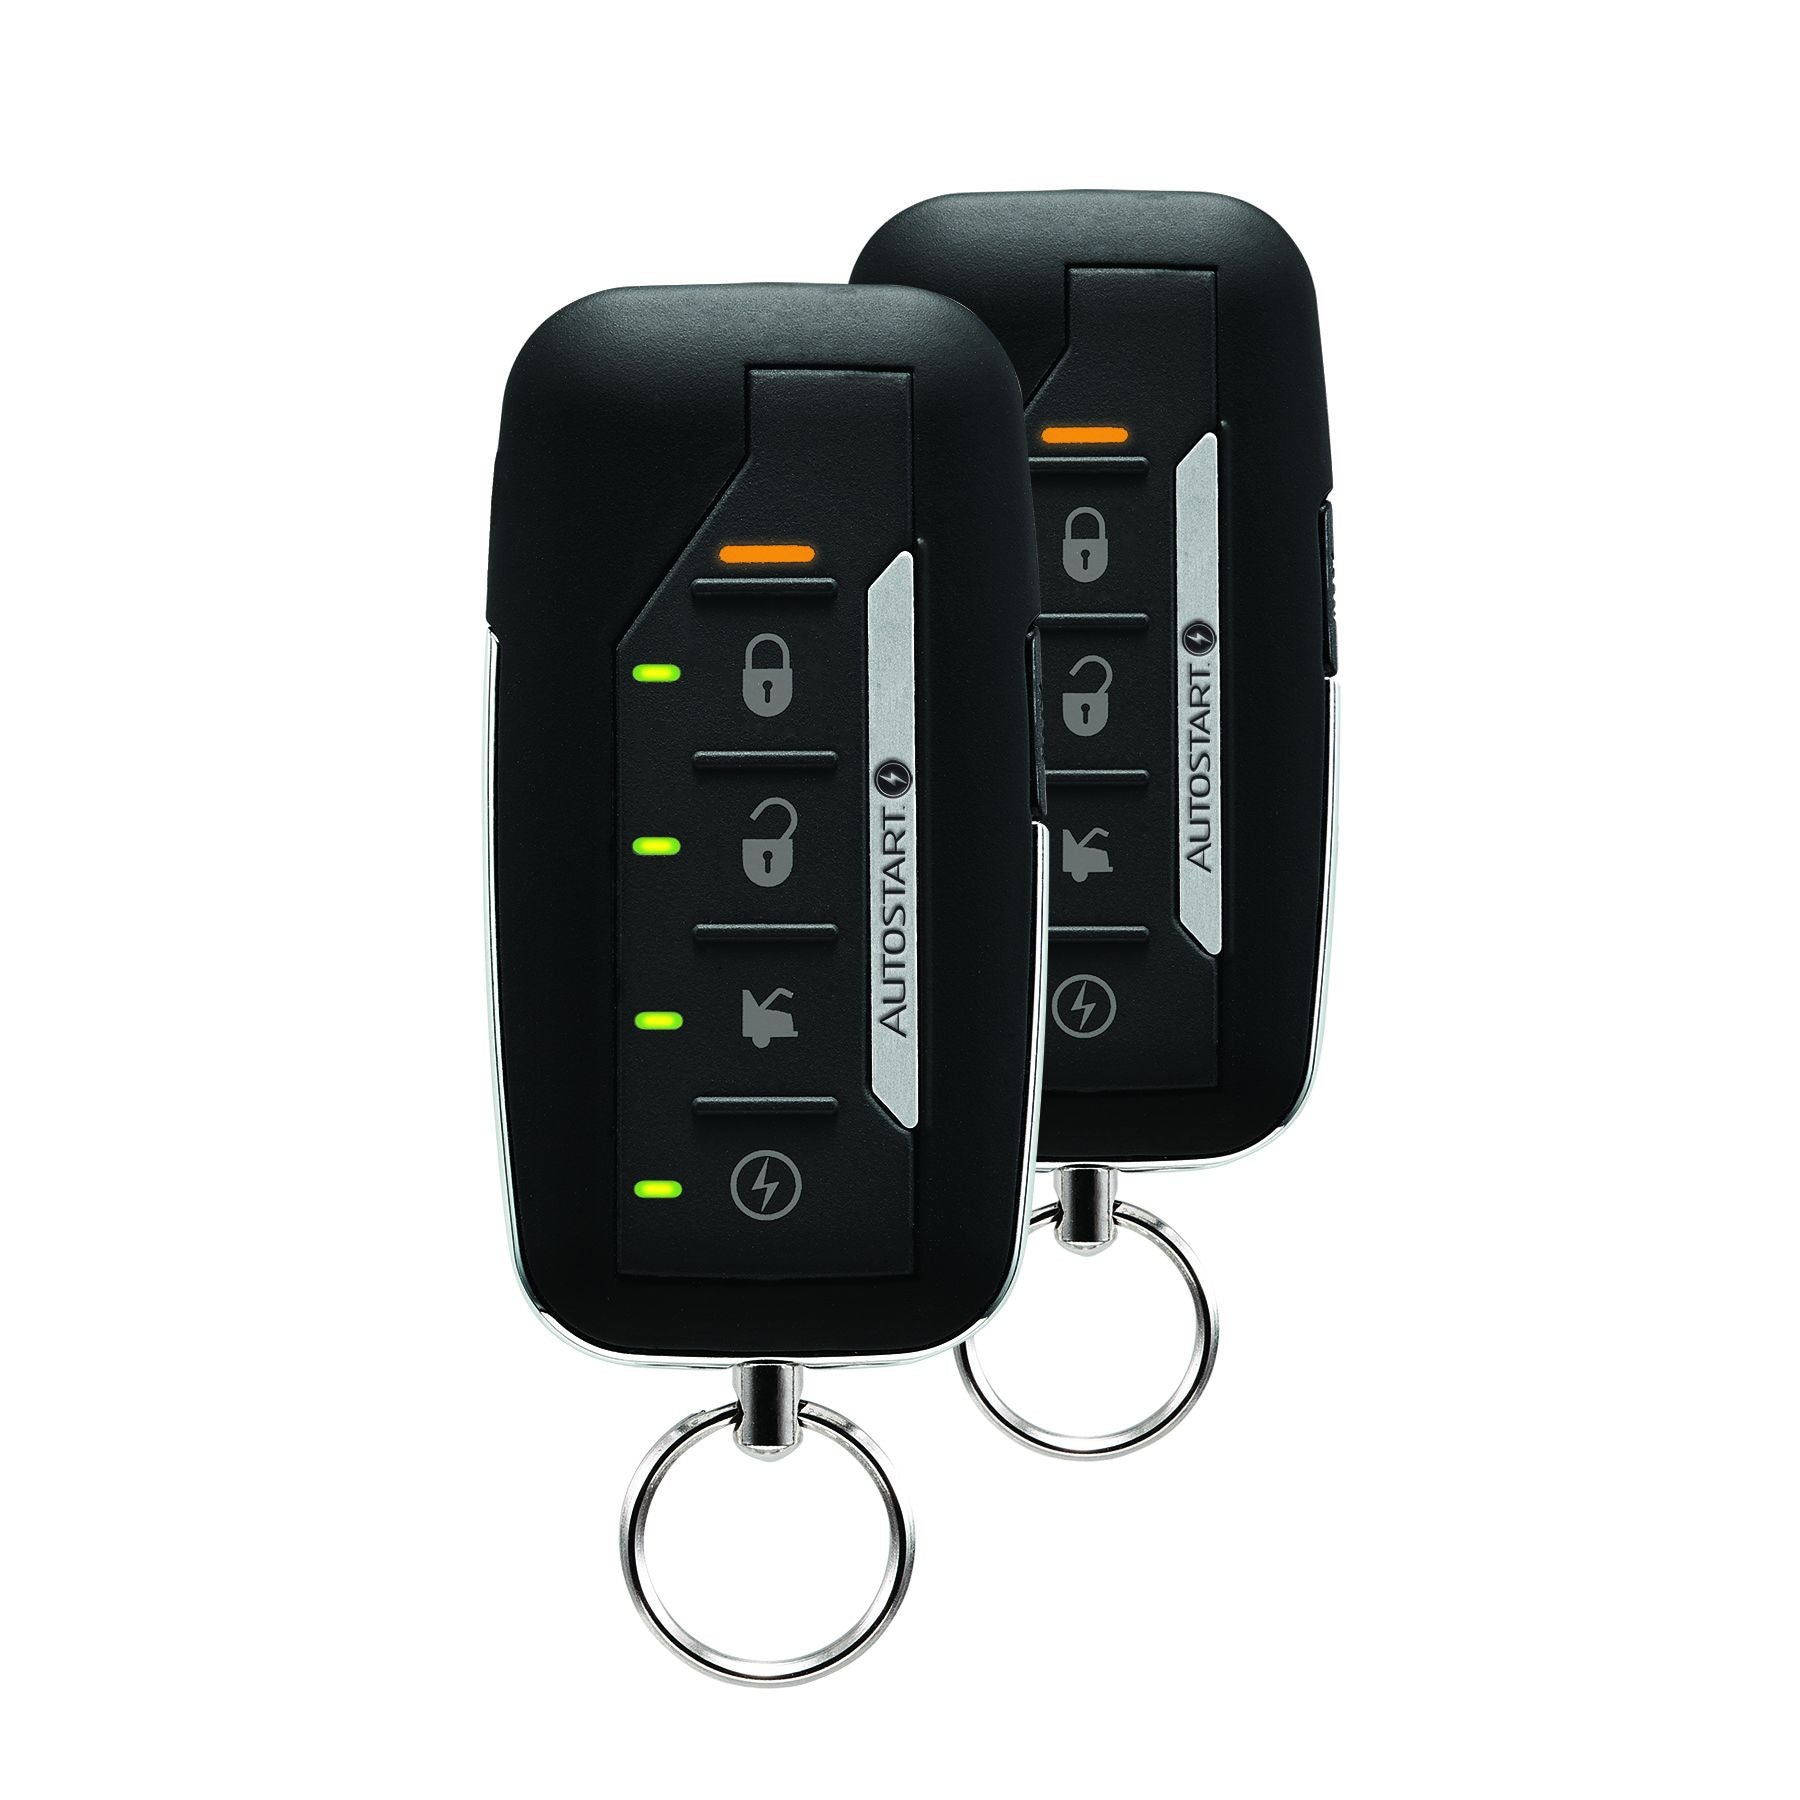 Autostart AS-2386TWS - 2-Way Remote Start System with up to 5,200 feet/1,584 meters of range